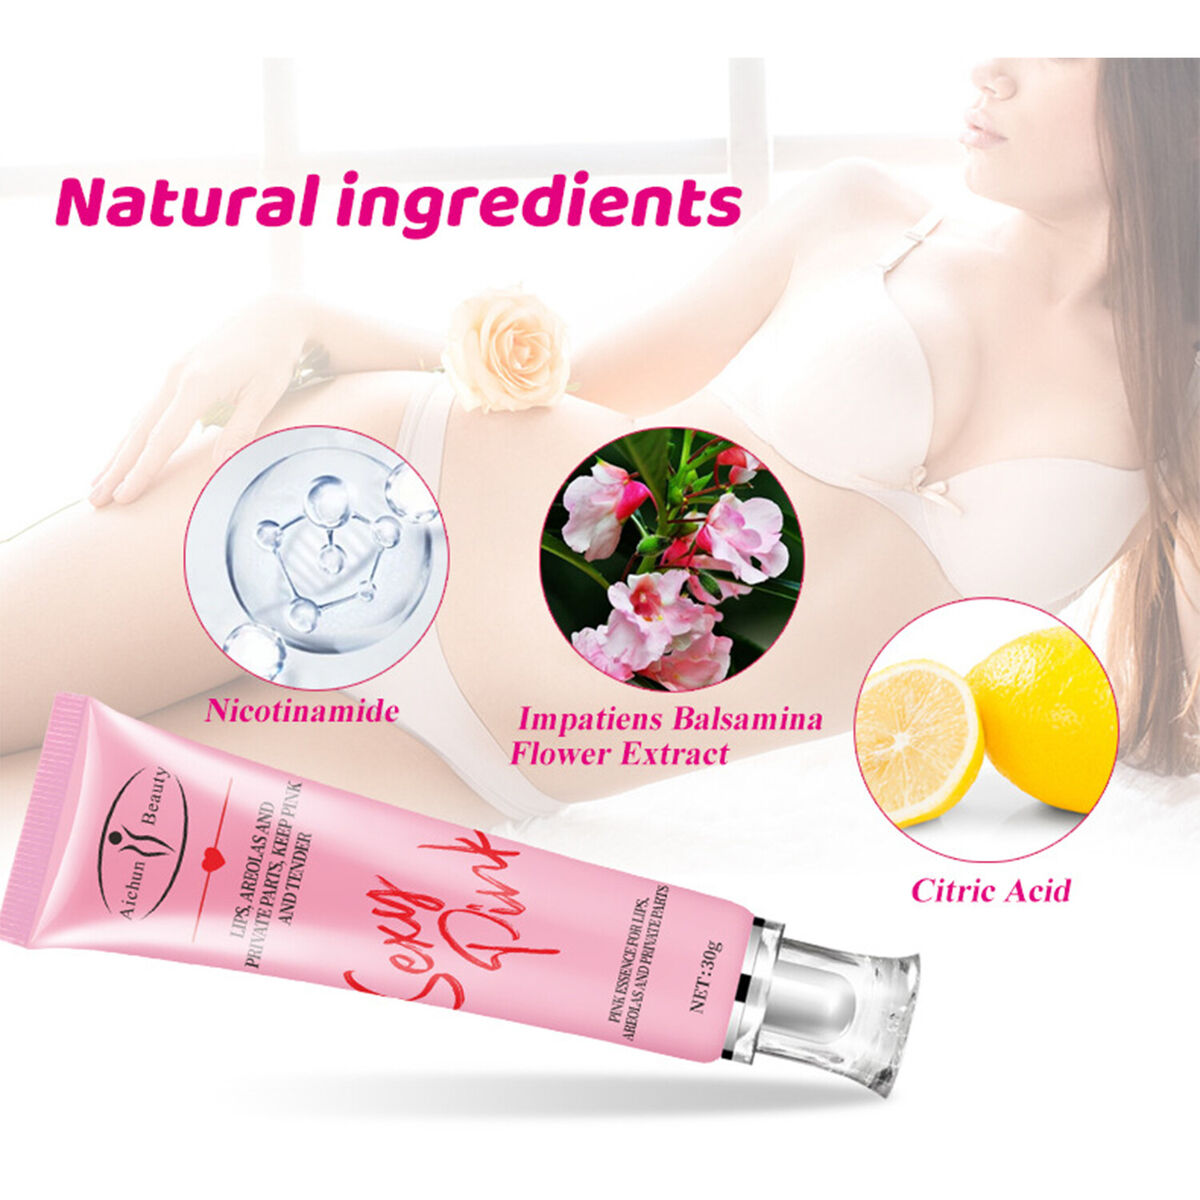 Aichun beauty lips areolas and private parts keep pink and Tender sexy pink cream 30g